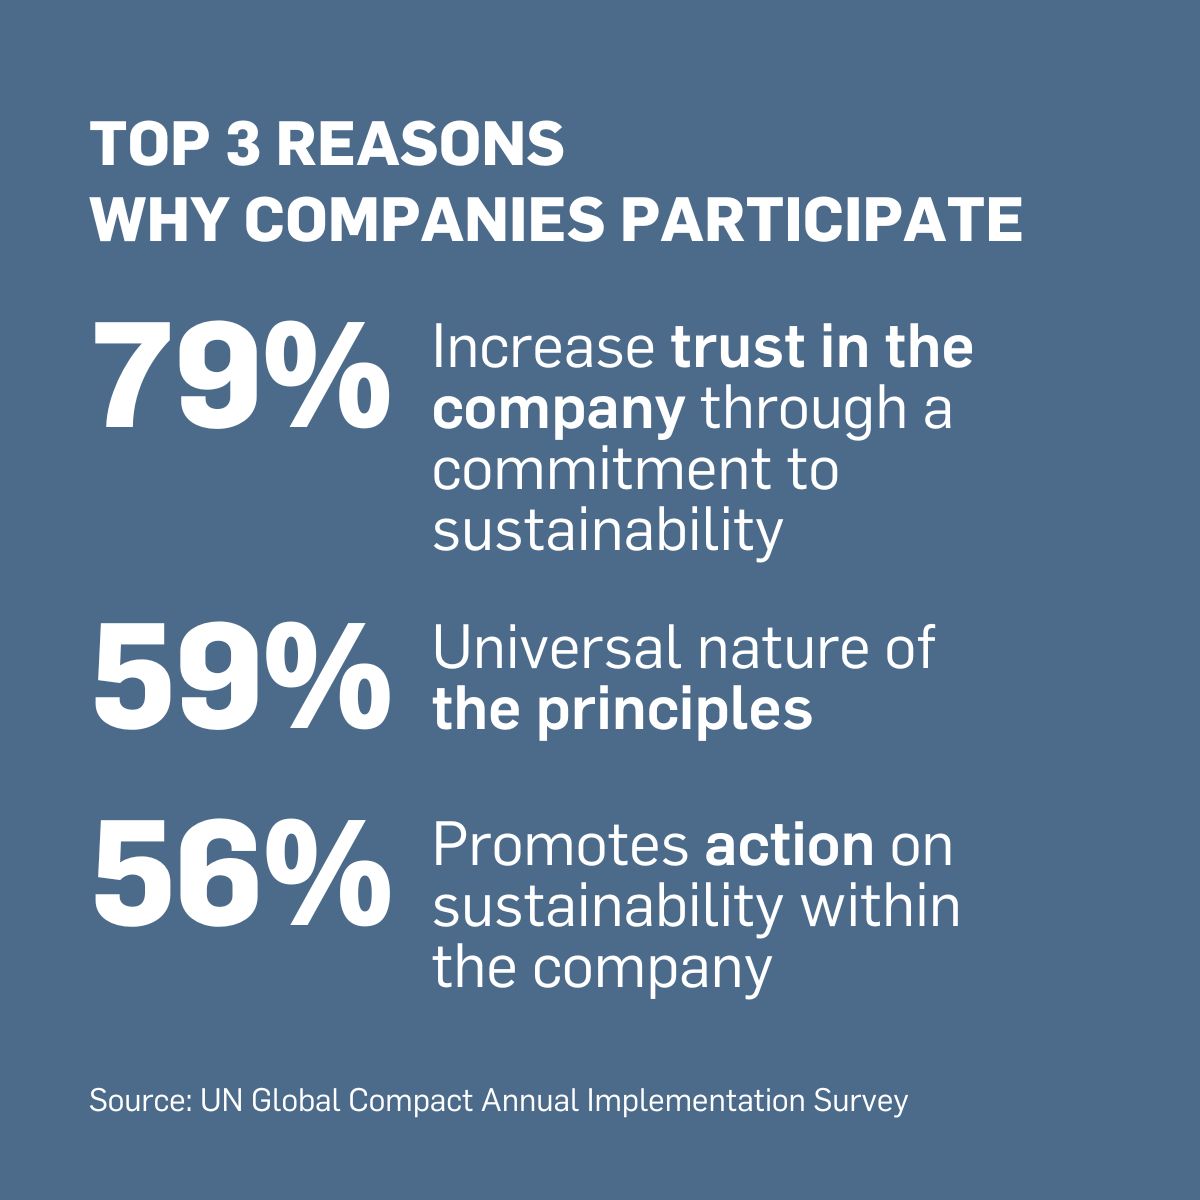 Top 3 reasons why companies participate